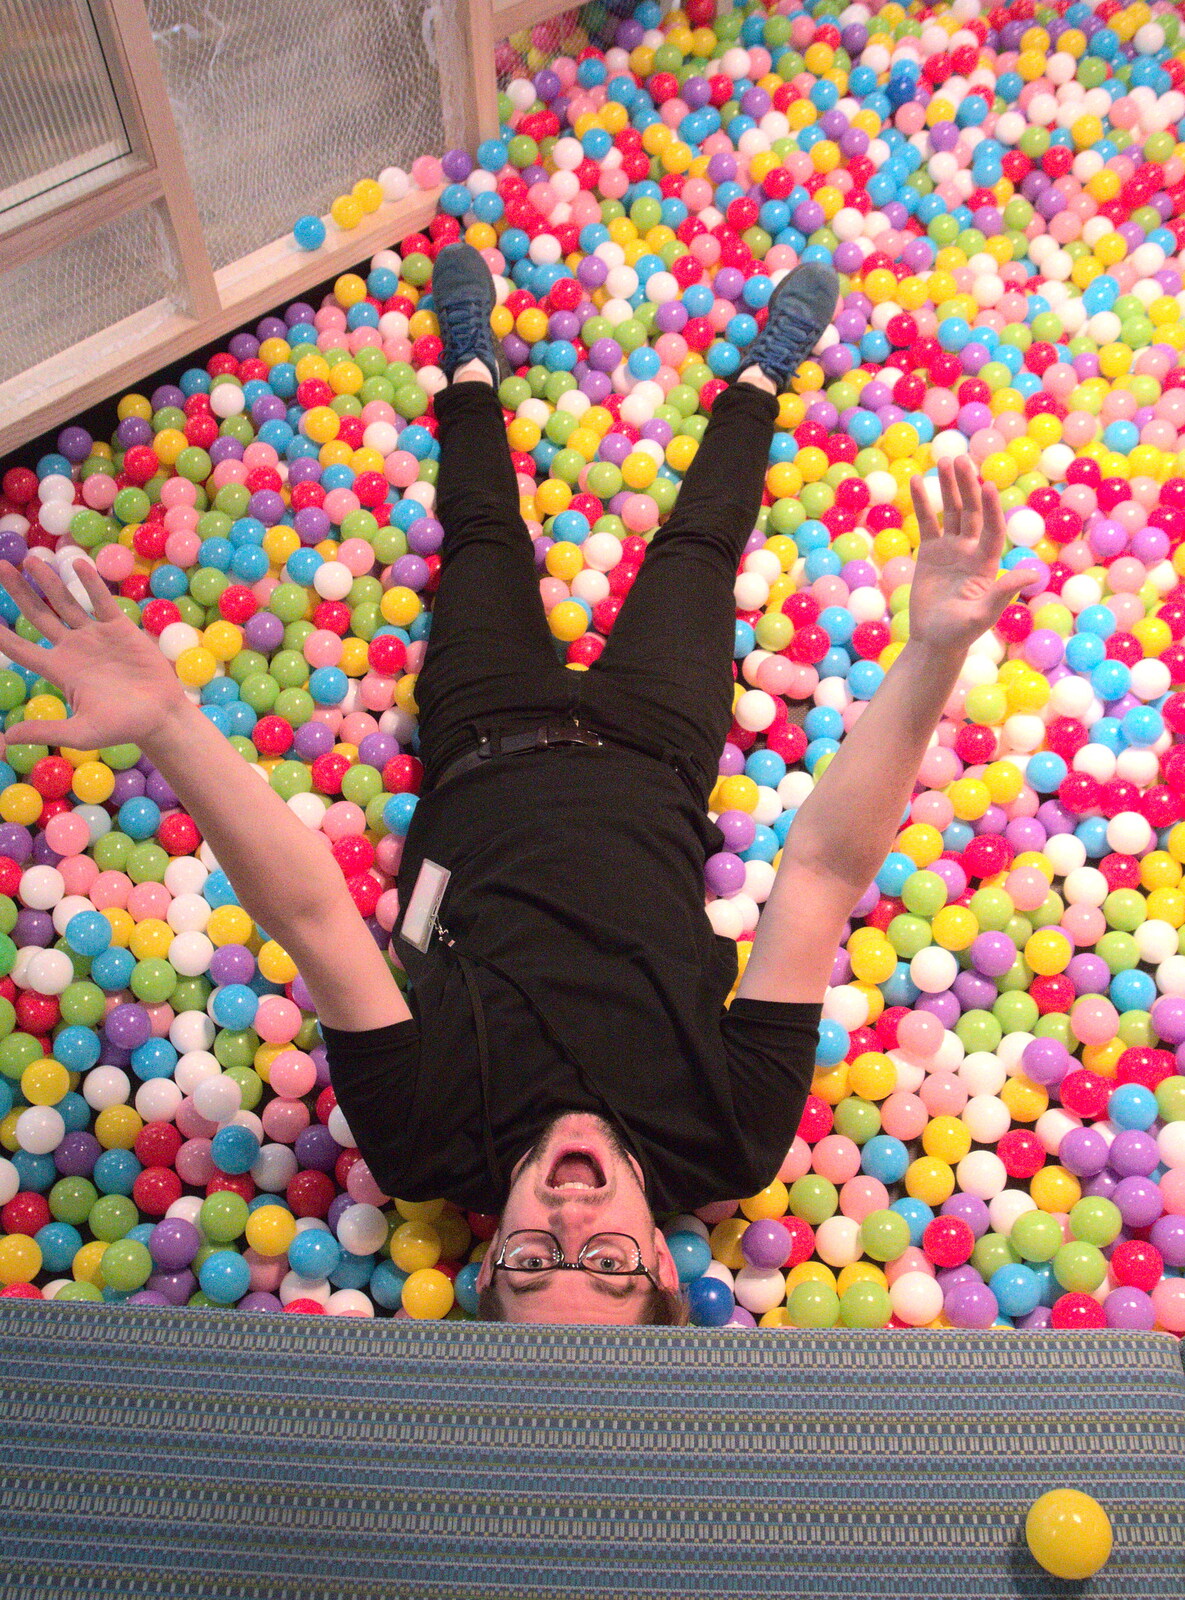 Dom flails about in the ball pool from A SwiftKey Innovation Week, Paddington, London - 27th July 2017